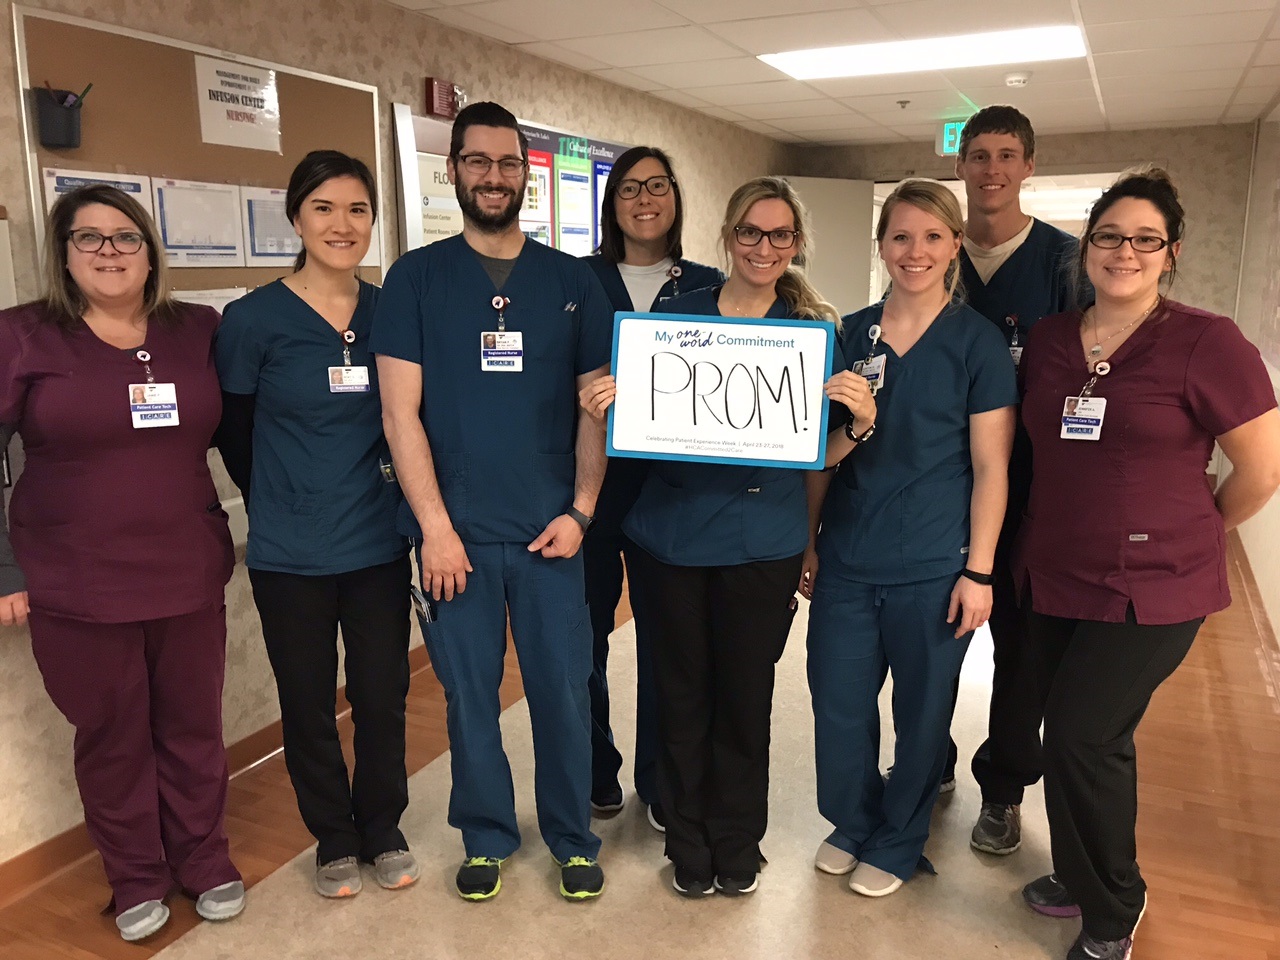 A group of nurses holding whiteboard that says "prom"